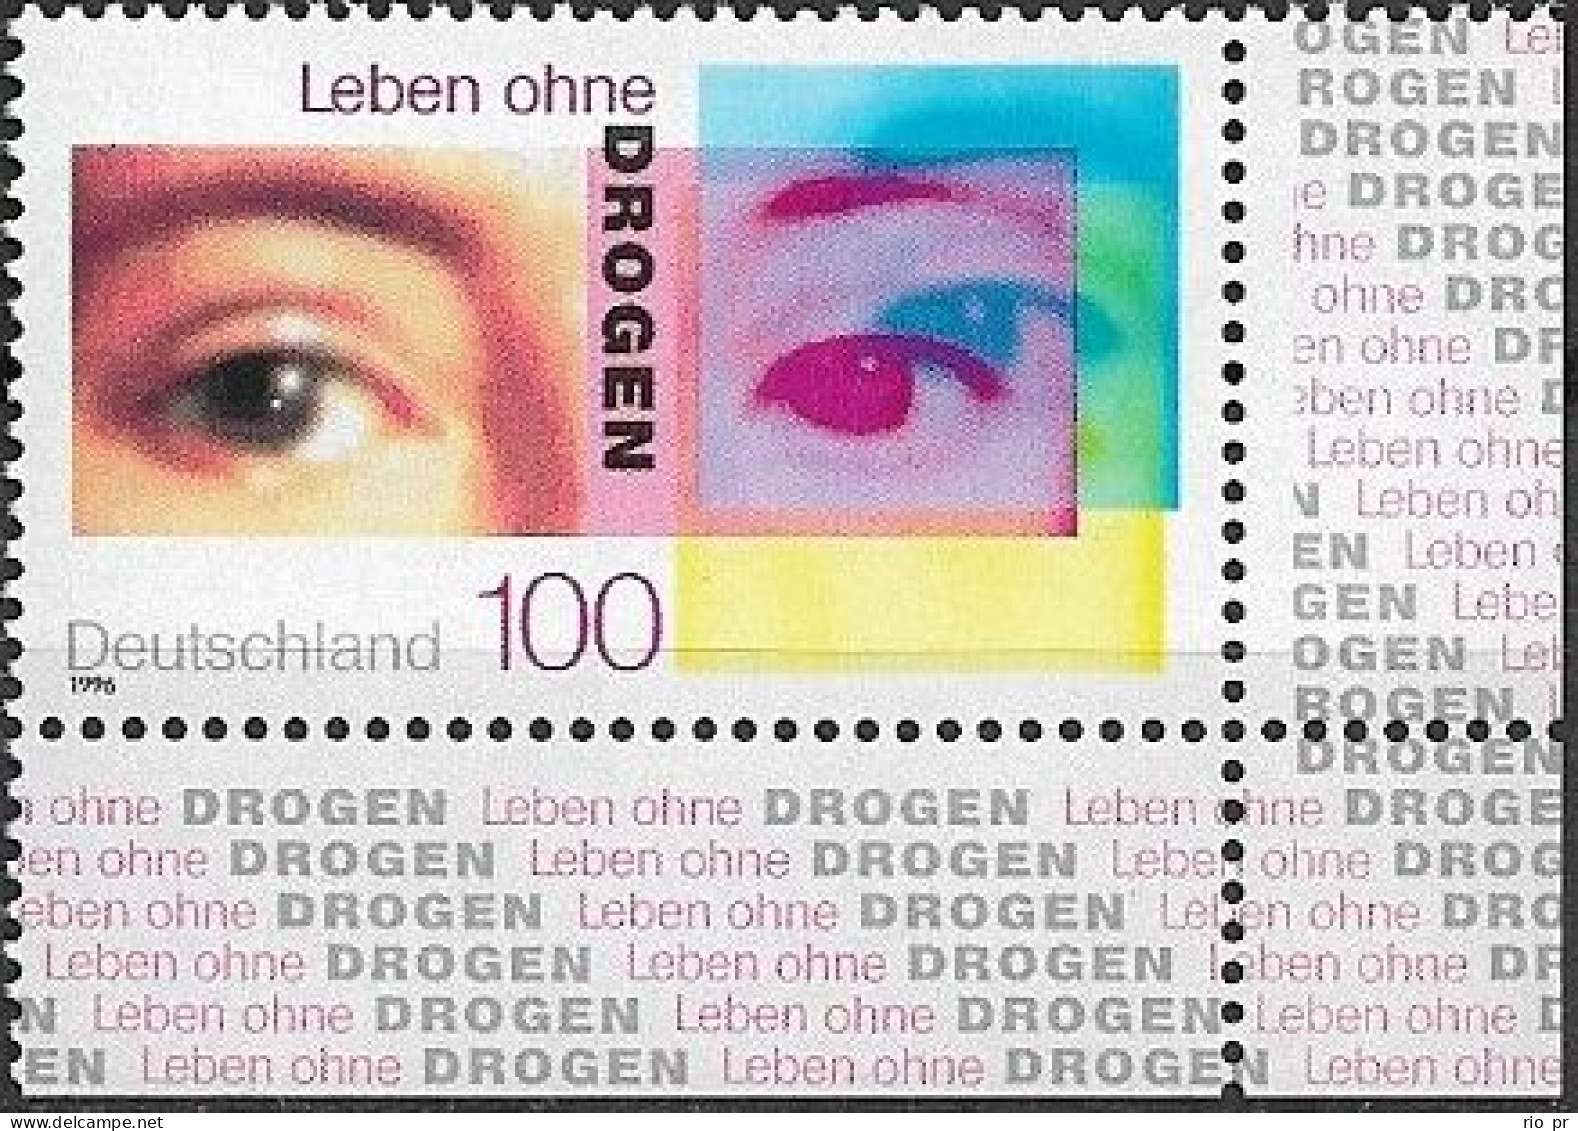 GERMANY (BRD) - CAMPAIGN AGAINST DRUG ABUSE (BOTTON RIGHT CORNER) 1996 - MNH - Drogue